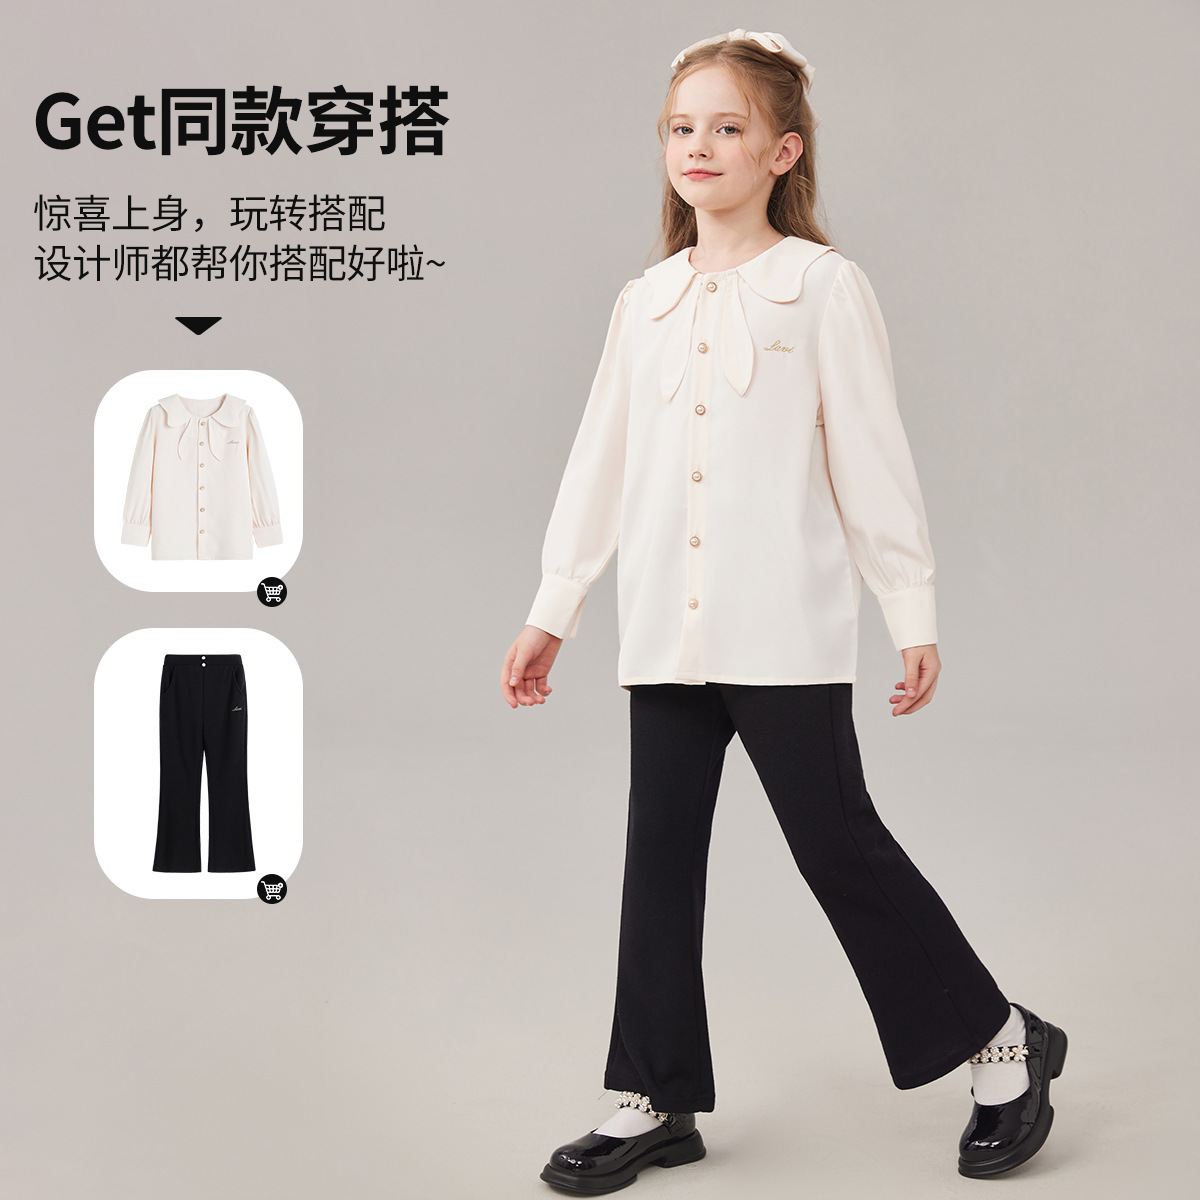 LAVI spring new girls' shirt medium and large children's clothing girls' casual lapel solid color bottoming shirt elegant lady